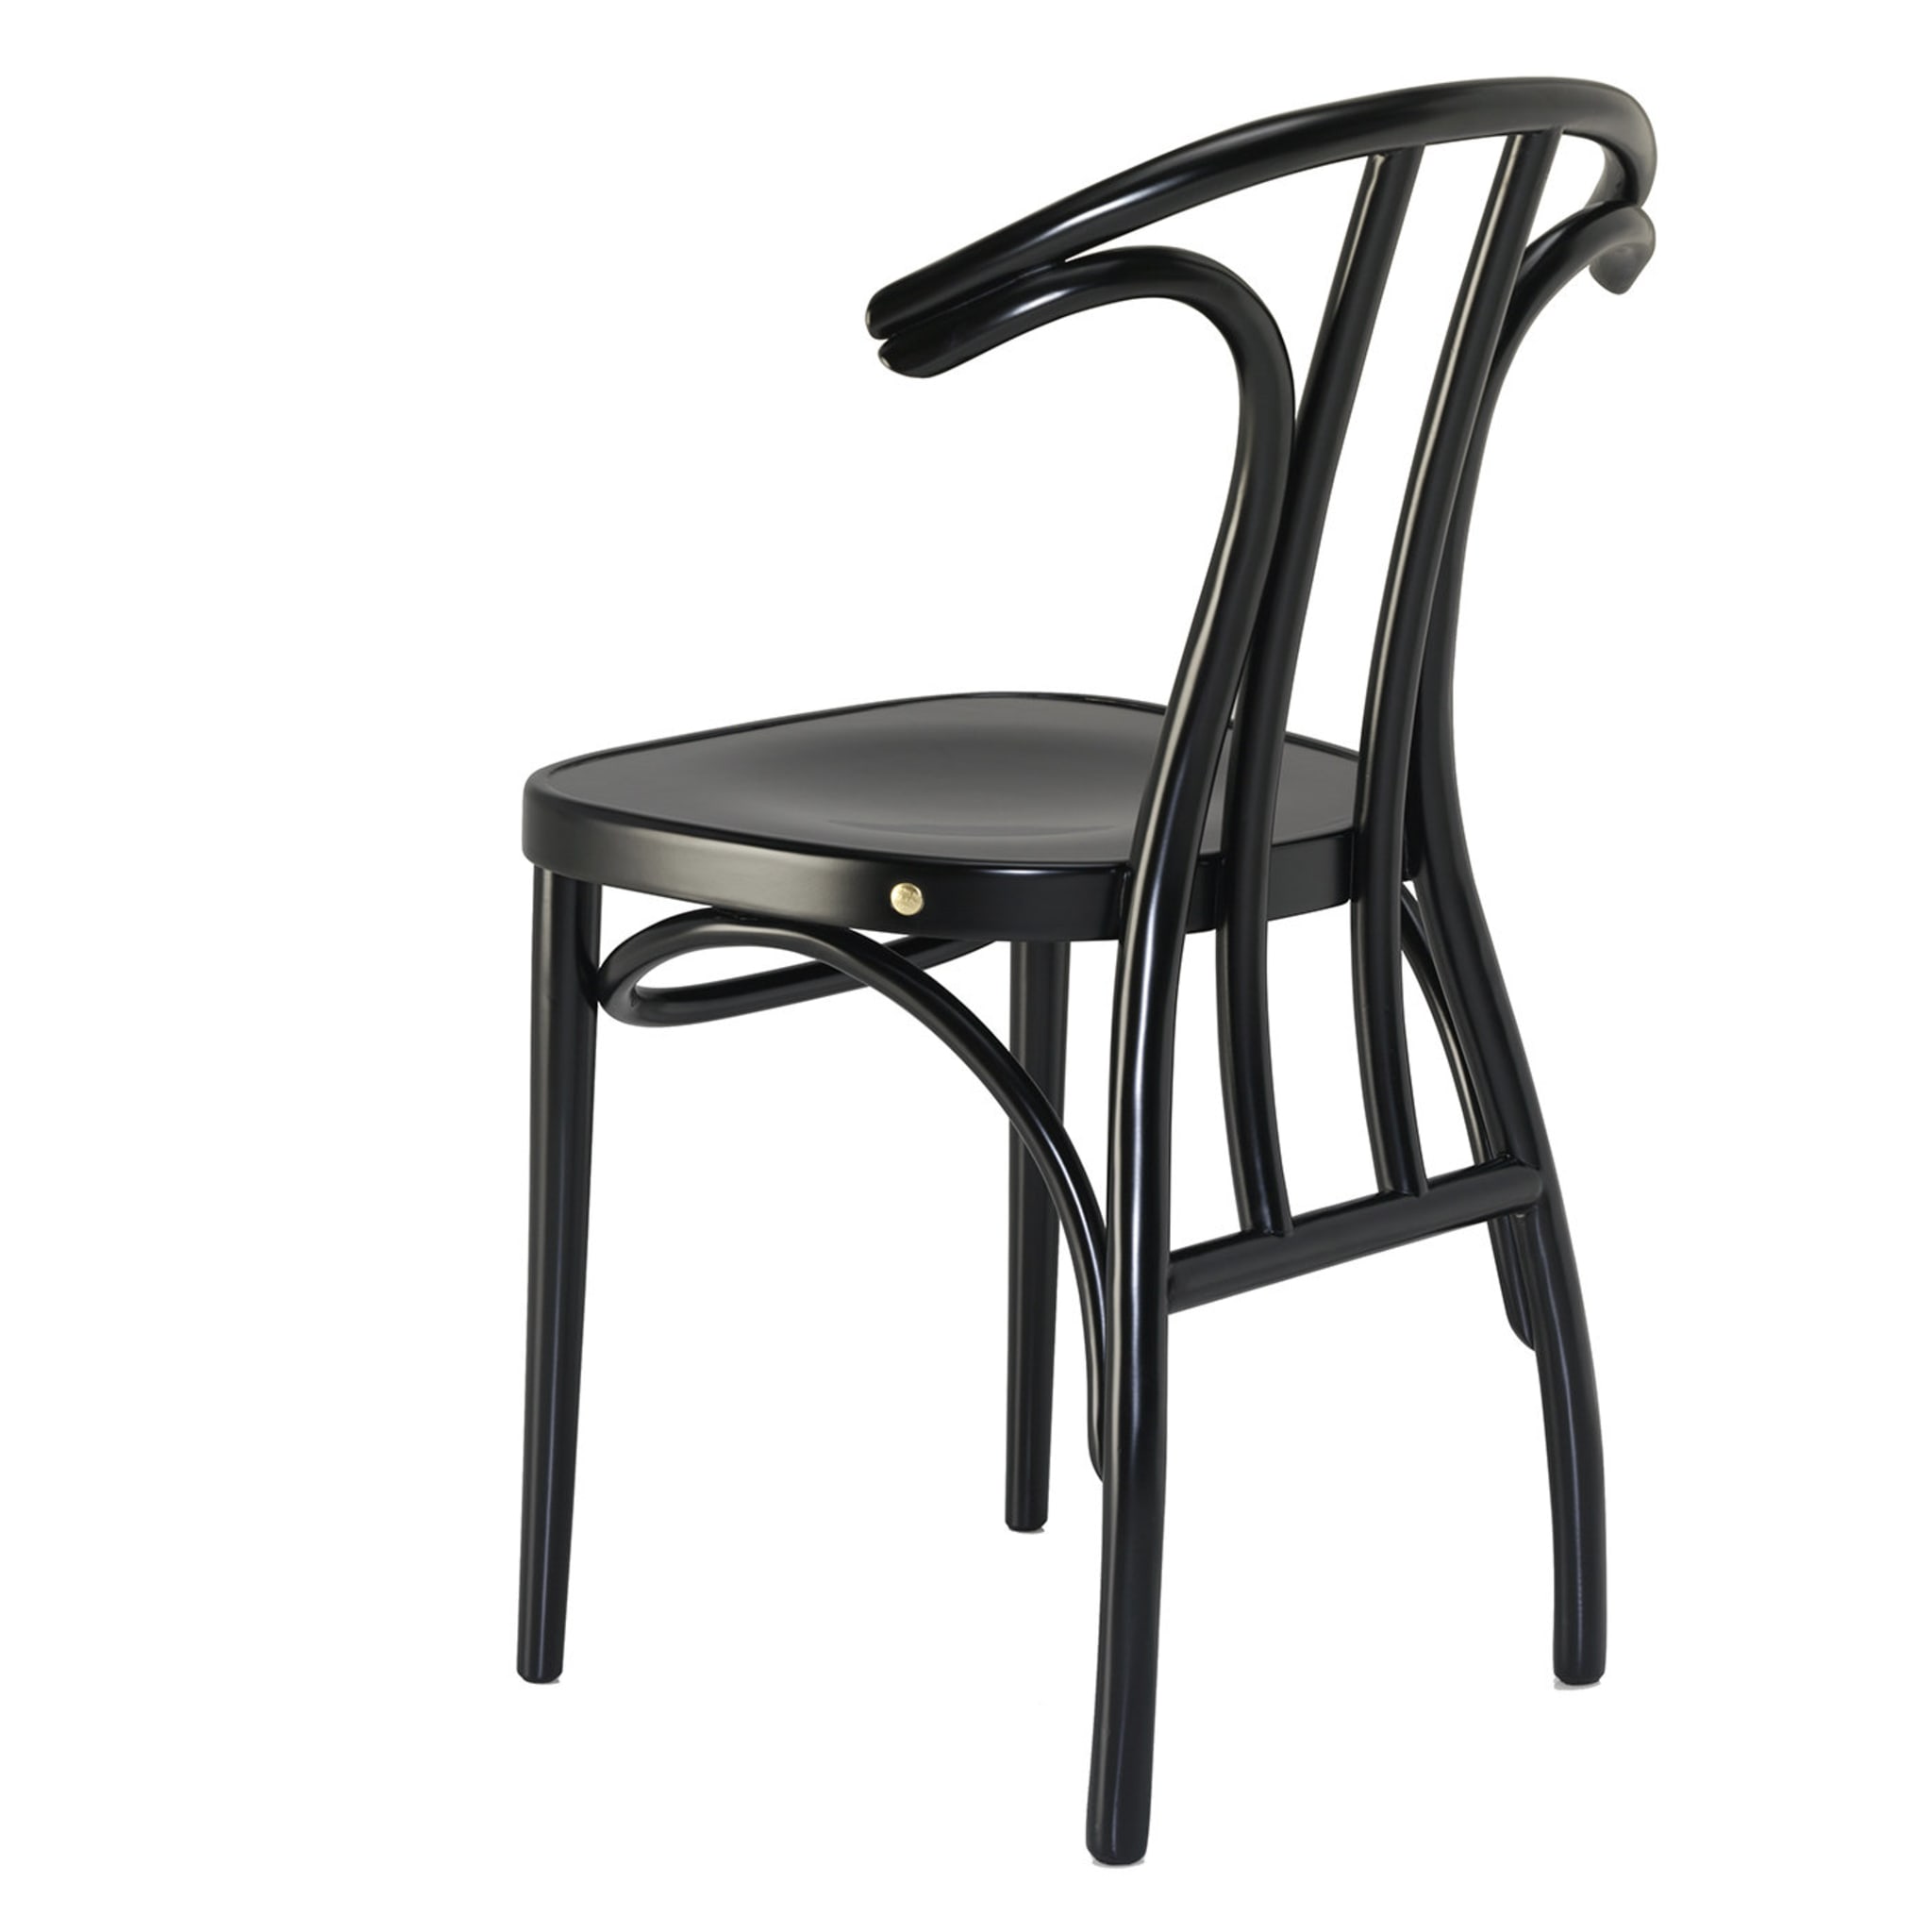 Radetzky Chair by Michele De Lucchi - Alternative view 2